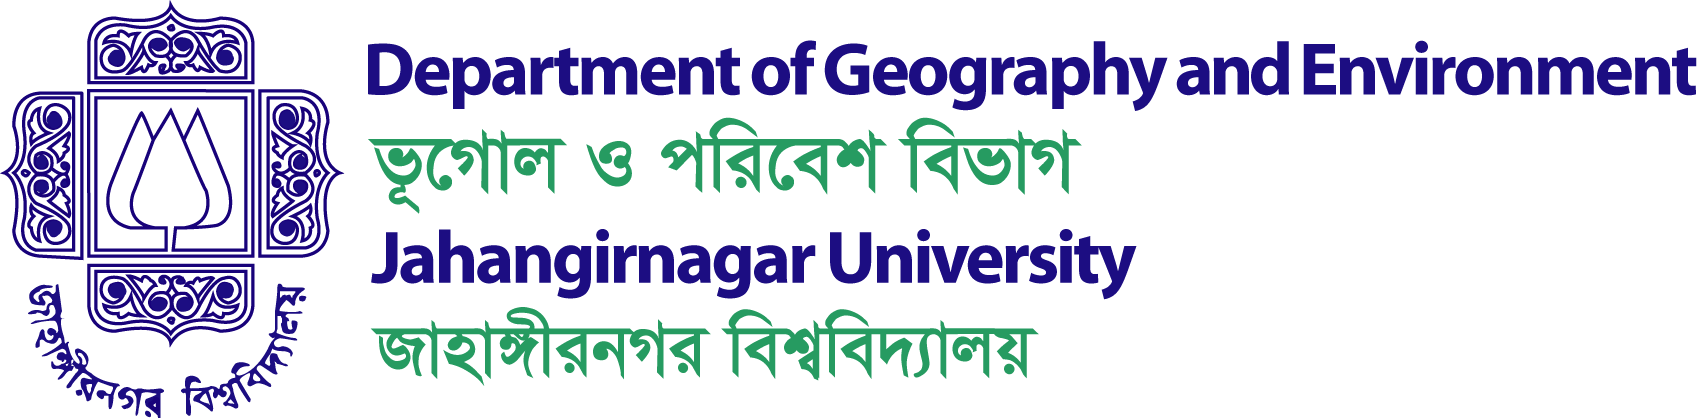 Department of Geography and Environment